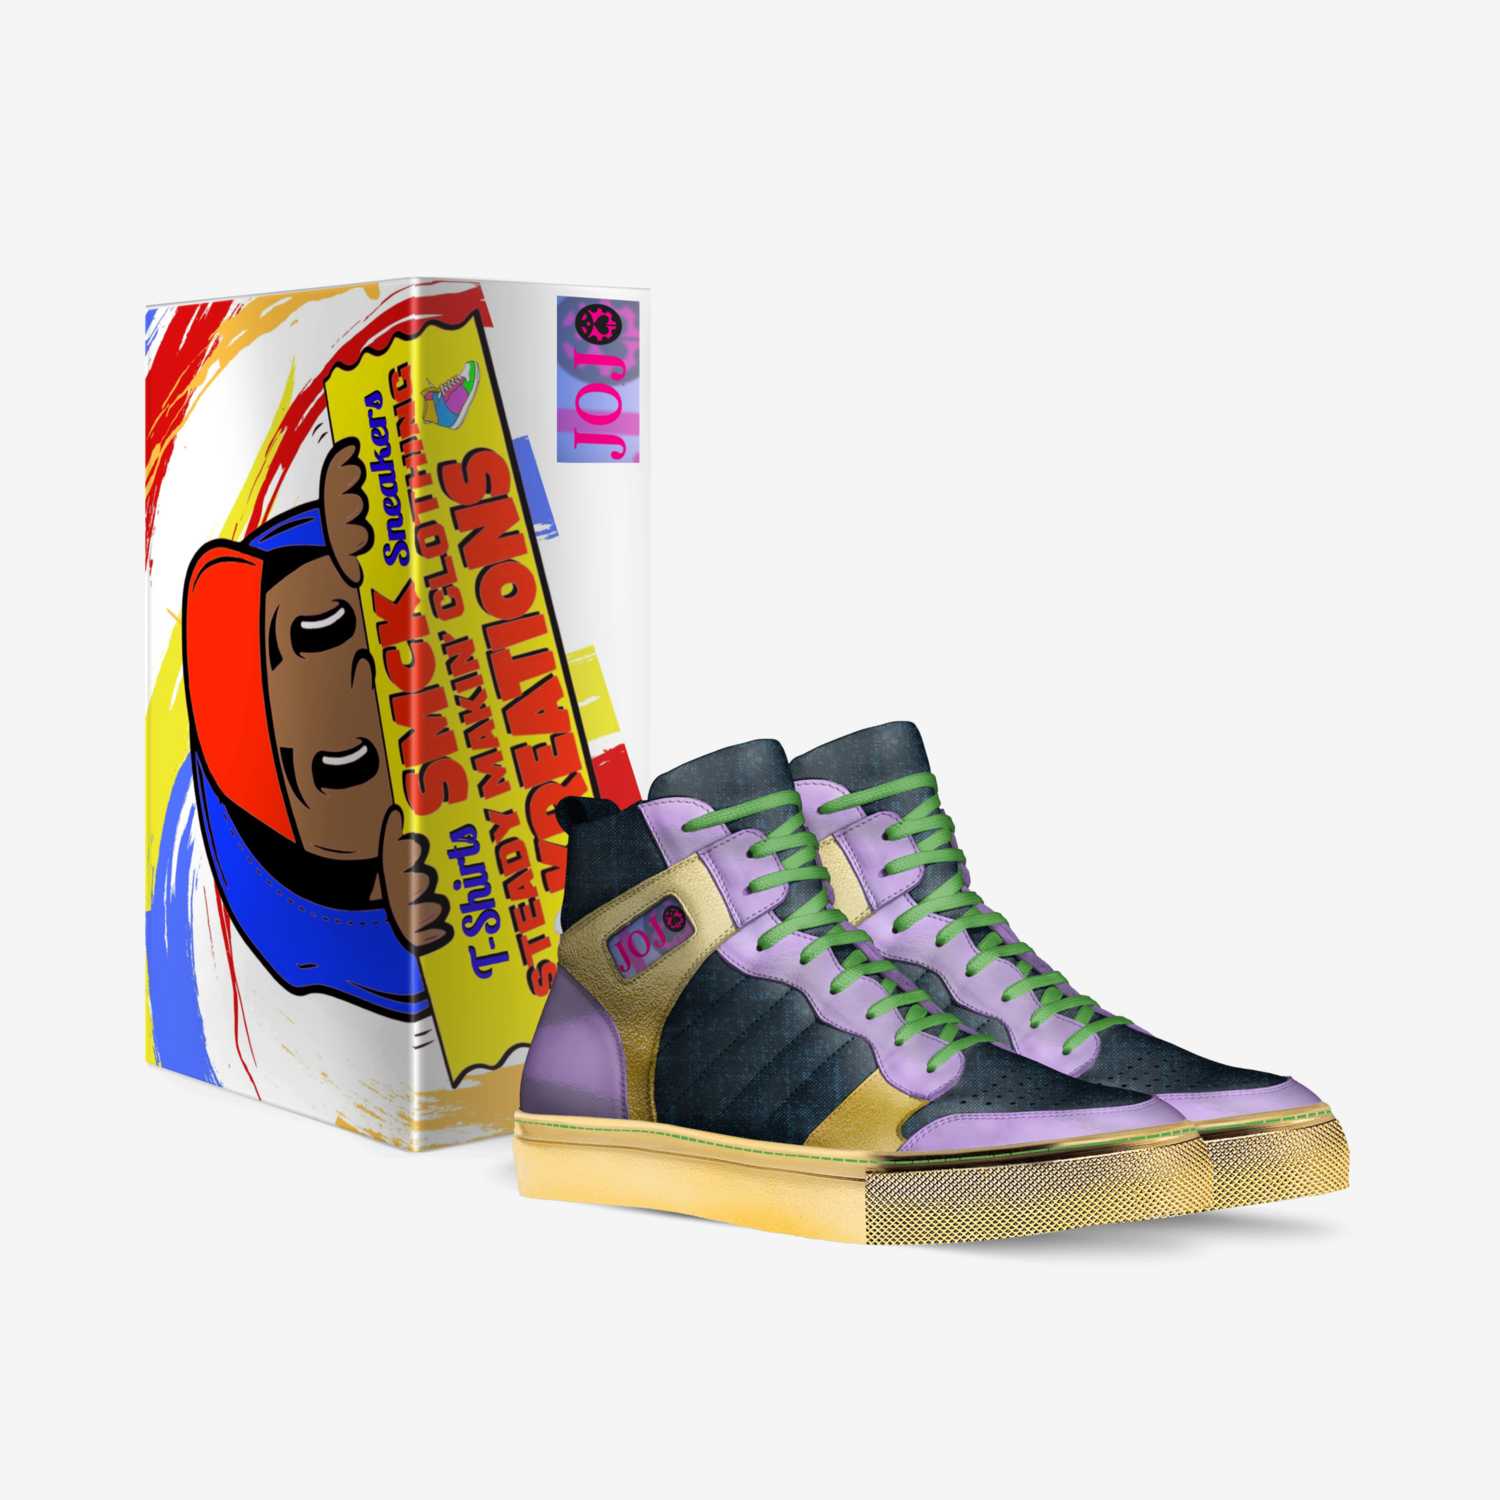 Giorno Giovanna custom made in Italy shoes by Shawn Mcnair | Box view